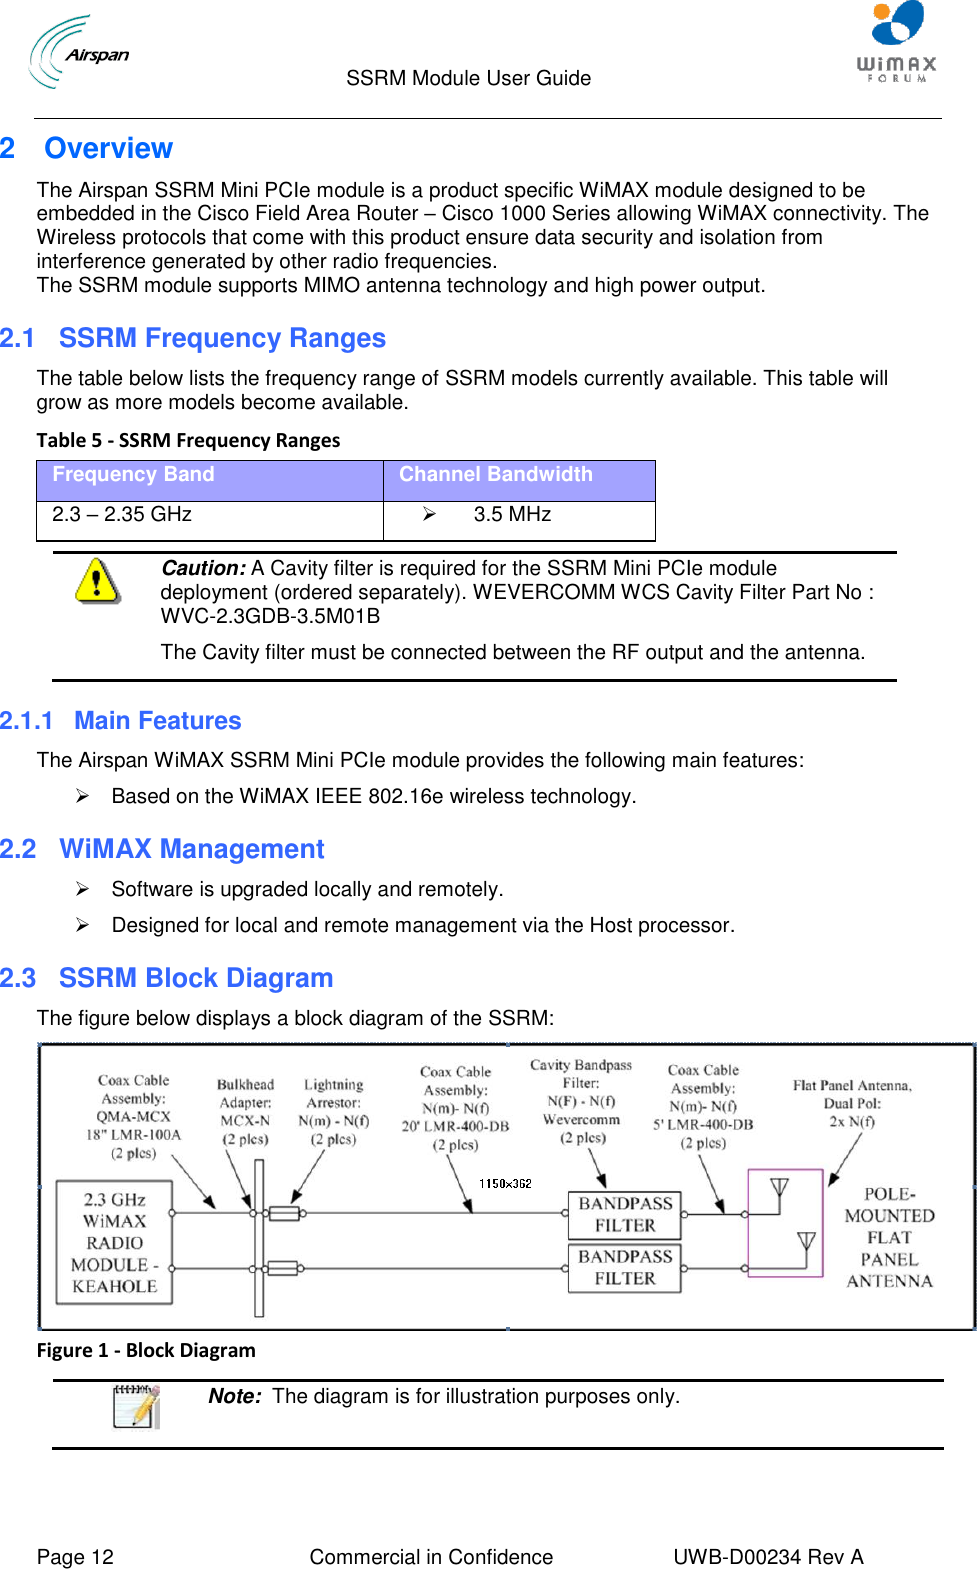                                  SSRM Module User Guide     Page 12  Commercial in Confidence  UWB-D00234 Rev A    2  Overview The Airspan SSRM Mini PCIe module is a product specific WiMAX module designed to be embedded in the Cisco Field Area Router – Cisco 1000 Series allowing WiMAX connectivity. The Wireless protocols that come with this product ensure data security and isolation from interference generated by other radio frequencies. The SSRM module supports MIMO antenna technology and high power output.  2.1 SSRM Frequency Ranges The table below lists the frequency range of SSRM models currently available. This table will grow as more models become available. Table 5 - SSRM Frequency Ranges Frequency Band Channel Bandwidth 2.3 – 2.35 GHz   3.5 MHz   Caution: A Cavity filter is required for the SSRM Mini PCIe module deployment (ordered separately). WEVERCOMM WCS Cavity Filter Part No : WVC-2.3GDB-3.5M01B The Cavity filter must be connected between the RF output and the antenna. 2.1.1  Main Features The Airspan WiMAX SSRM Mini PCIe module provides the following main features:   Based on the WiMAX IEEE 802.16e wireless technology. 2.2  WiMAX Management   Software is upgraded locally and remotely.   Designed for local and remote management via the Host processor. 2.3 SSRM Block Diagram The figure below displays a block diagram of the SSRM:  Figure 1 - Block Diagram   Note:  The diagram is for illustration purposes only.  